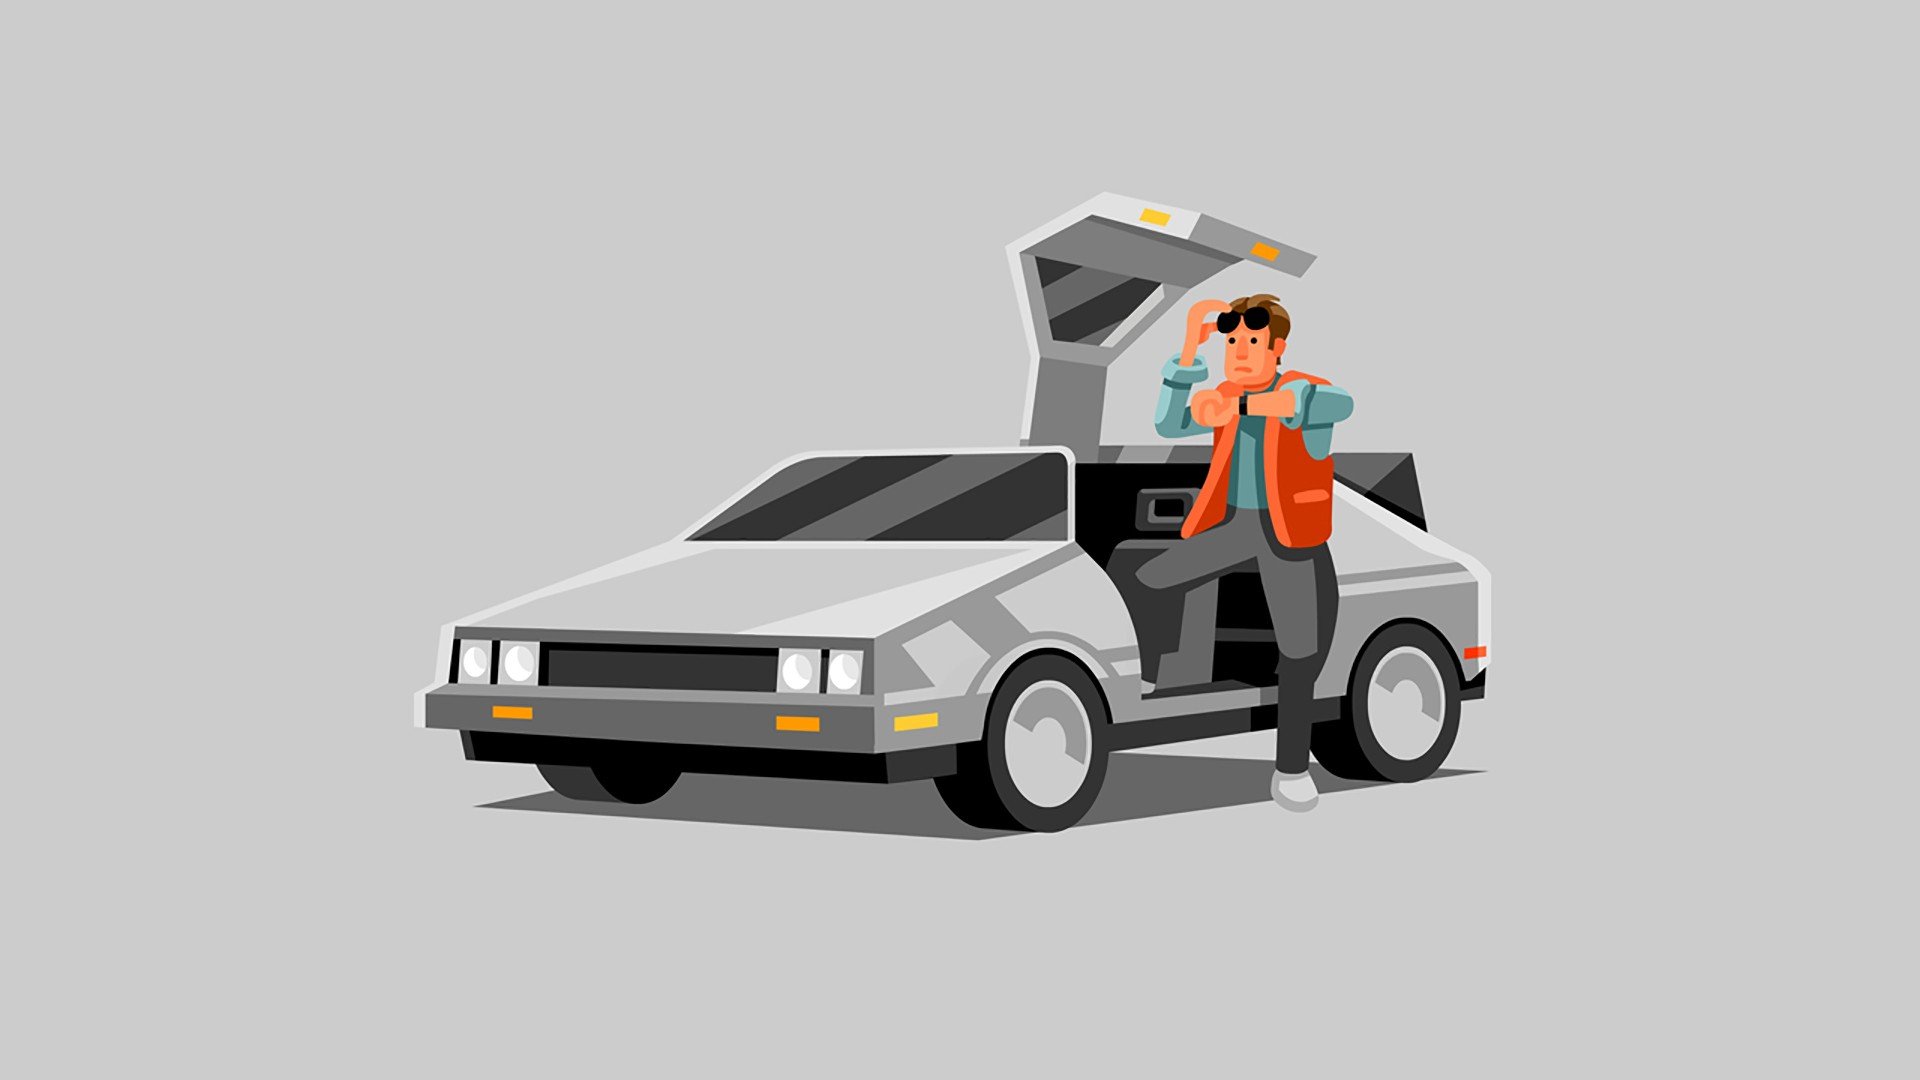 DeLorean Back To The Future Movies Time Machine Marty McFly Artwork Car Vehicle Simple Movie Vehicle Wallpaper:1920x1080